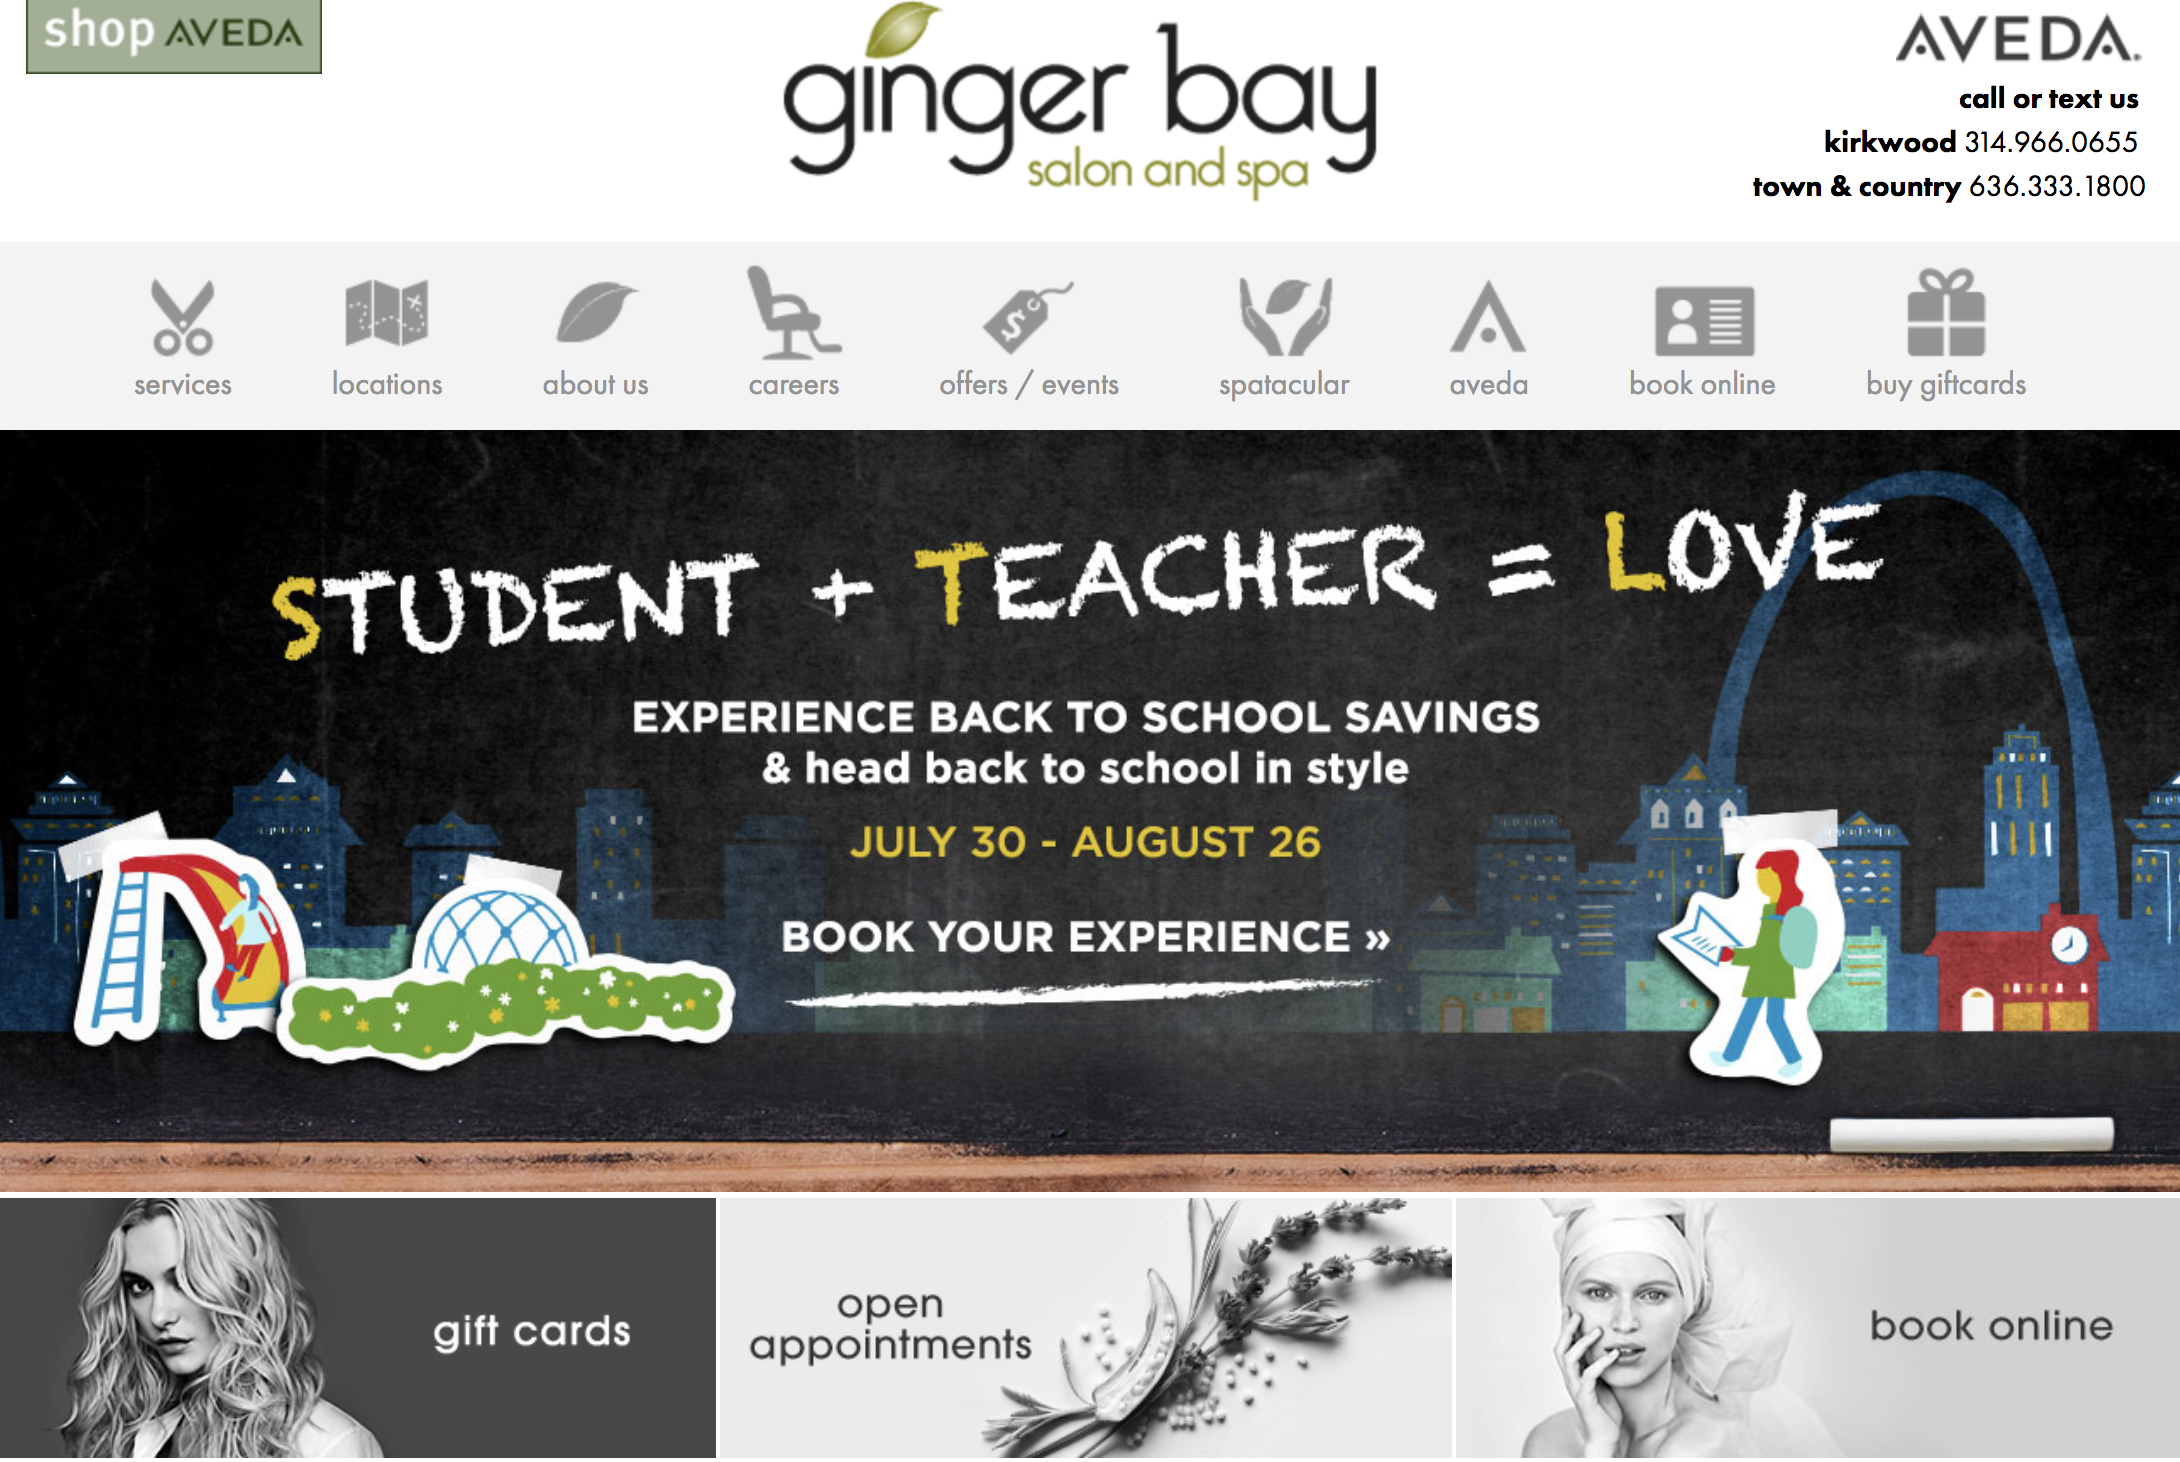 ginger-bay-gift-cards-homepage